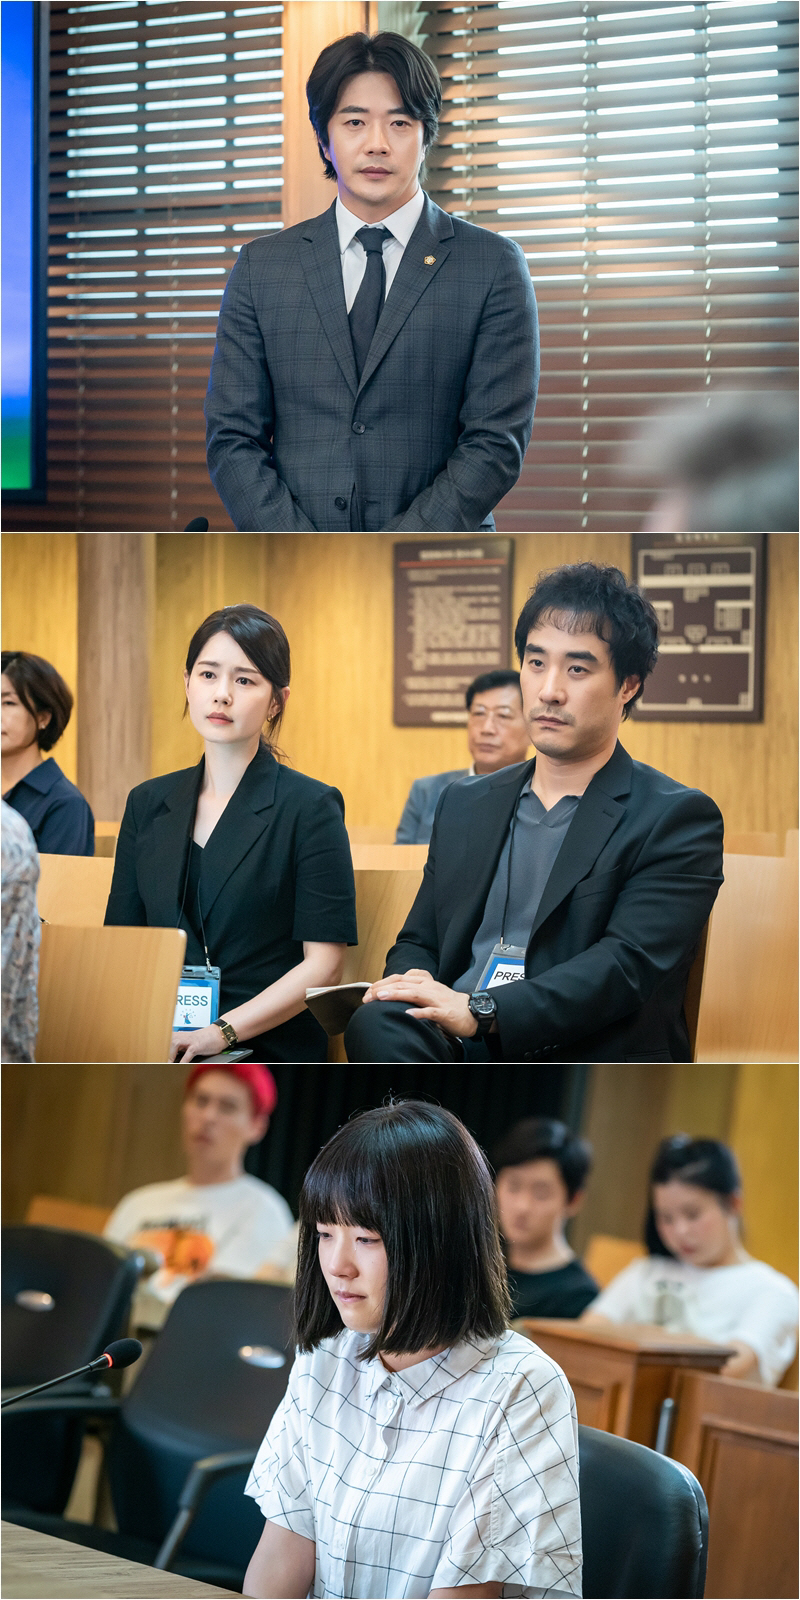 SBS gilt drama Fly and Go to Chun Yong (director Kwak Jung-hwan, playwright Park Sang-gyu, Planning & Production Studio & New, Investment Wave) captured the judge who became a tearful sea on the 5th.Park Tae-yong (Kwon Sang-woo), a public defender who was introduced to the defendant Jeong Myeong-hui (Won Bin), in the case of his father Rape and Death of a Housewife, at the request of Park Sam-soo, raises questions about whether he will lead another miracle.Soon after the last two broadcasts, there was a lot of attention to the new girl Won Bin who was acting on the girl Jeong Myeong-hui who lived with desperation rather than hope for the future.His appearance, which has been immersive even in a short appearance, added to the expectation of his father Rape and Death of a Housewipe event, which will be Park Tae-yong and Park Sam-soos first Confidential Assignment.Chae Bin is the back door of the audition show that the production teams heart is ringing.The first film of Flying and Going was also a trial scene of the case of Rape and Death of a Housewife.Chan Bin was applauded by Actor and staff gathered at the scene, melting the inside of a pure and soft girl in the rebellious eyes of 16 years old.Expectations are focused on Won Bins performance, with the hidden heart of Jeong Myeong-hui.Flying and going, said Park Tae-yong and Park Sam-soo, who will go to the first Confidential Assignment to overturn the version of the Jeong Myeong-hui case.I hope you will look forward to two movements that will give a big sound in a pleasant smile. Kwon Sang-woo, Bae Seong-woo and amazing synergy with Won Bin, please watch the performance of the expectation, he said.Meanwhile, the third episode of SBSs Fly and Go For airs tomorrow (6th) at 10 p.m. and also comes on air as a VOD (see again) on Wave.